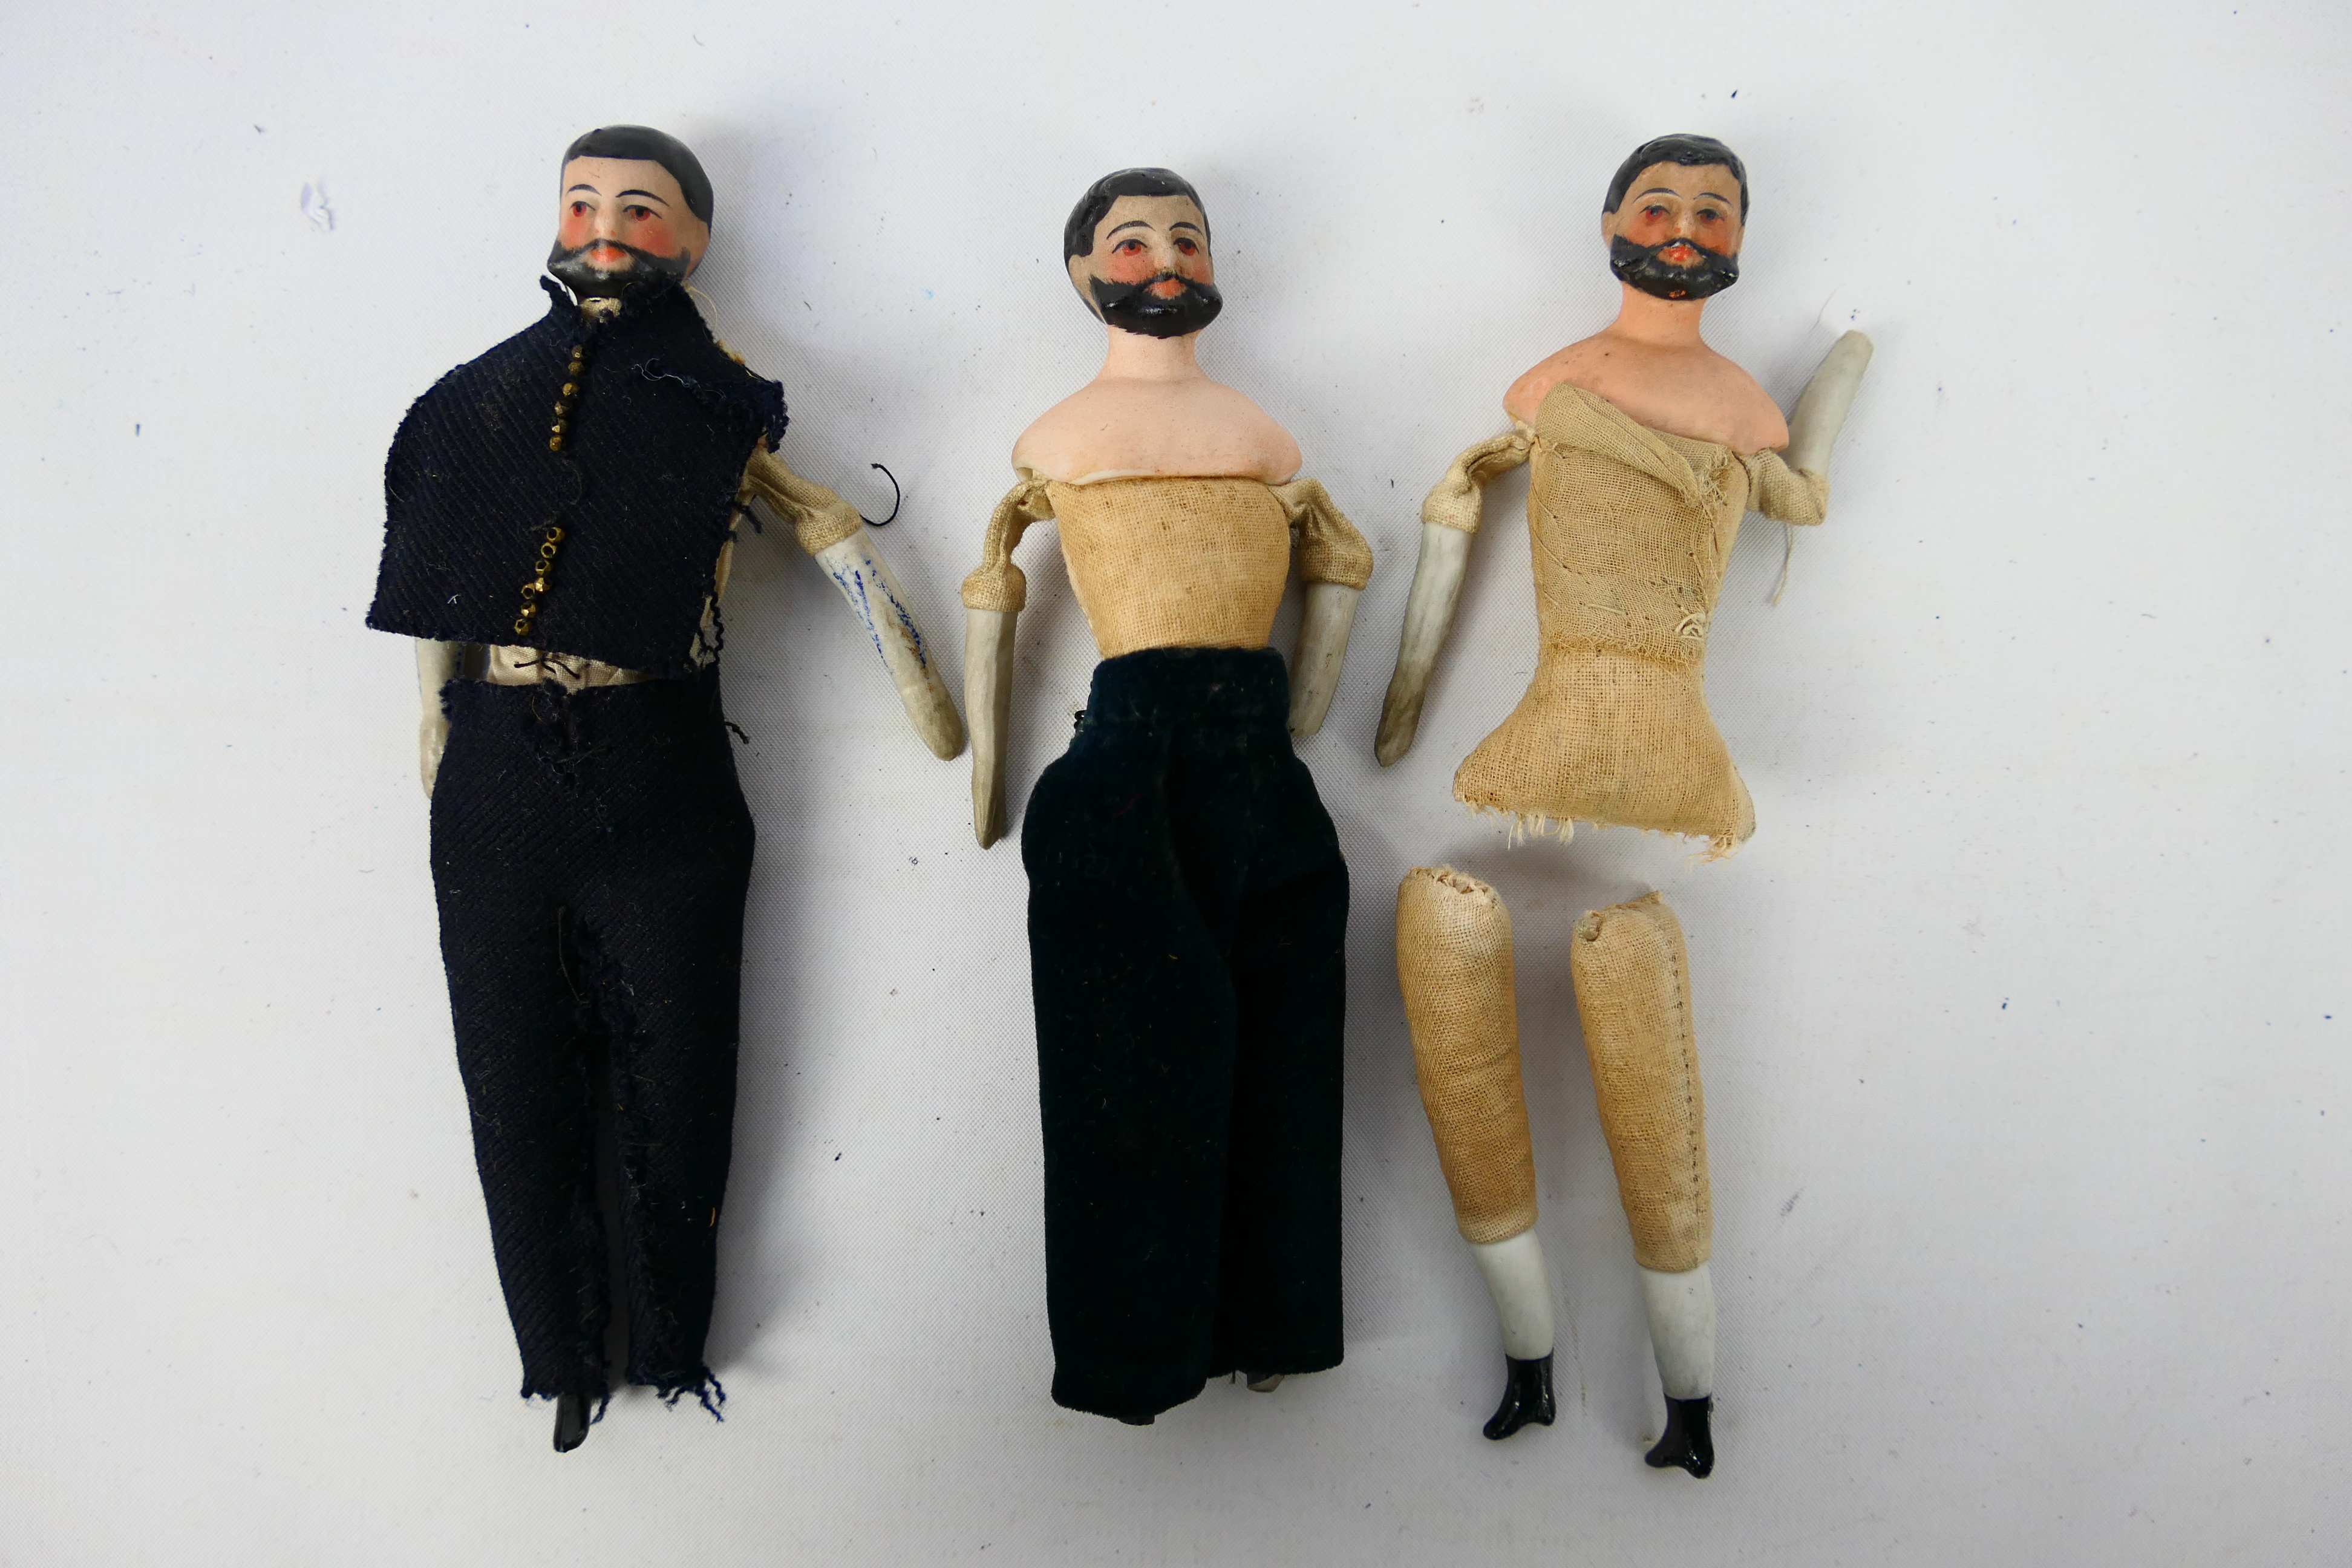 Bisque Male Dolls - 3 x bearded dolls with bisque heads, shoulders and lower limbs and cloth bodies.